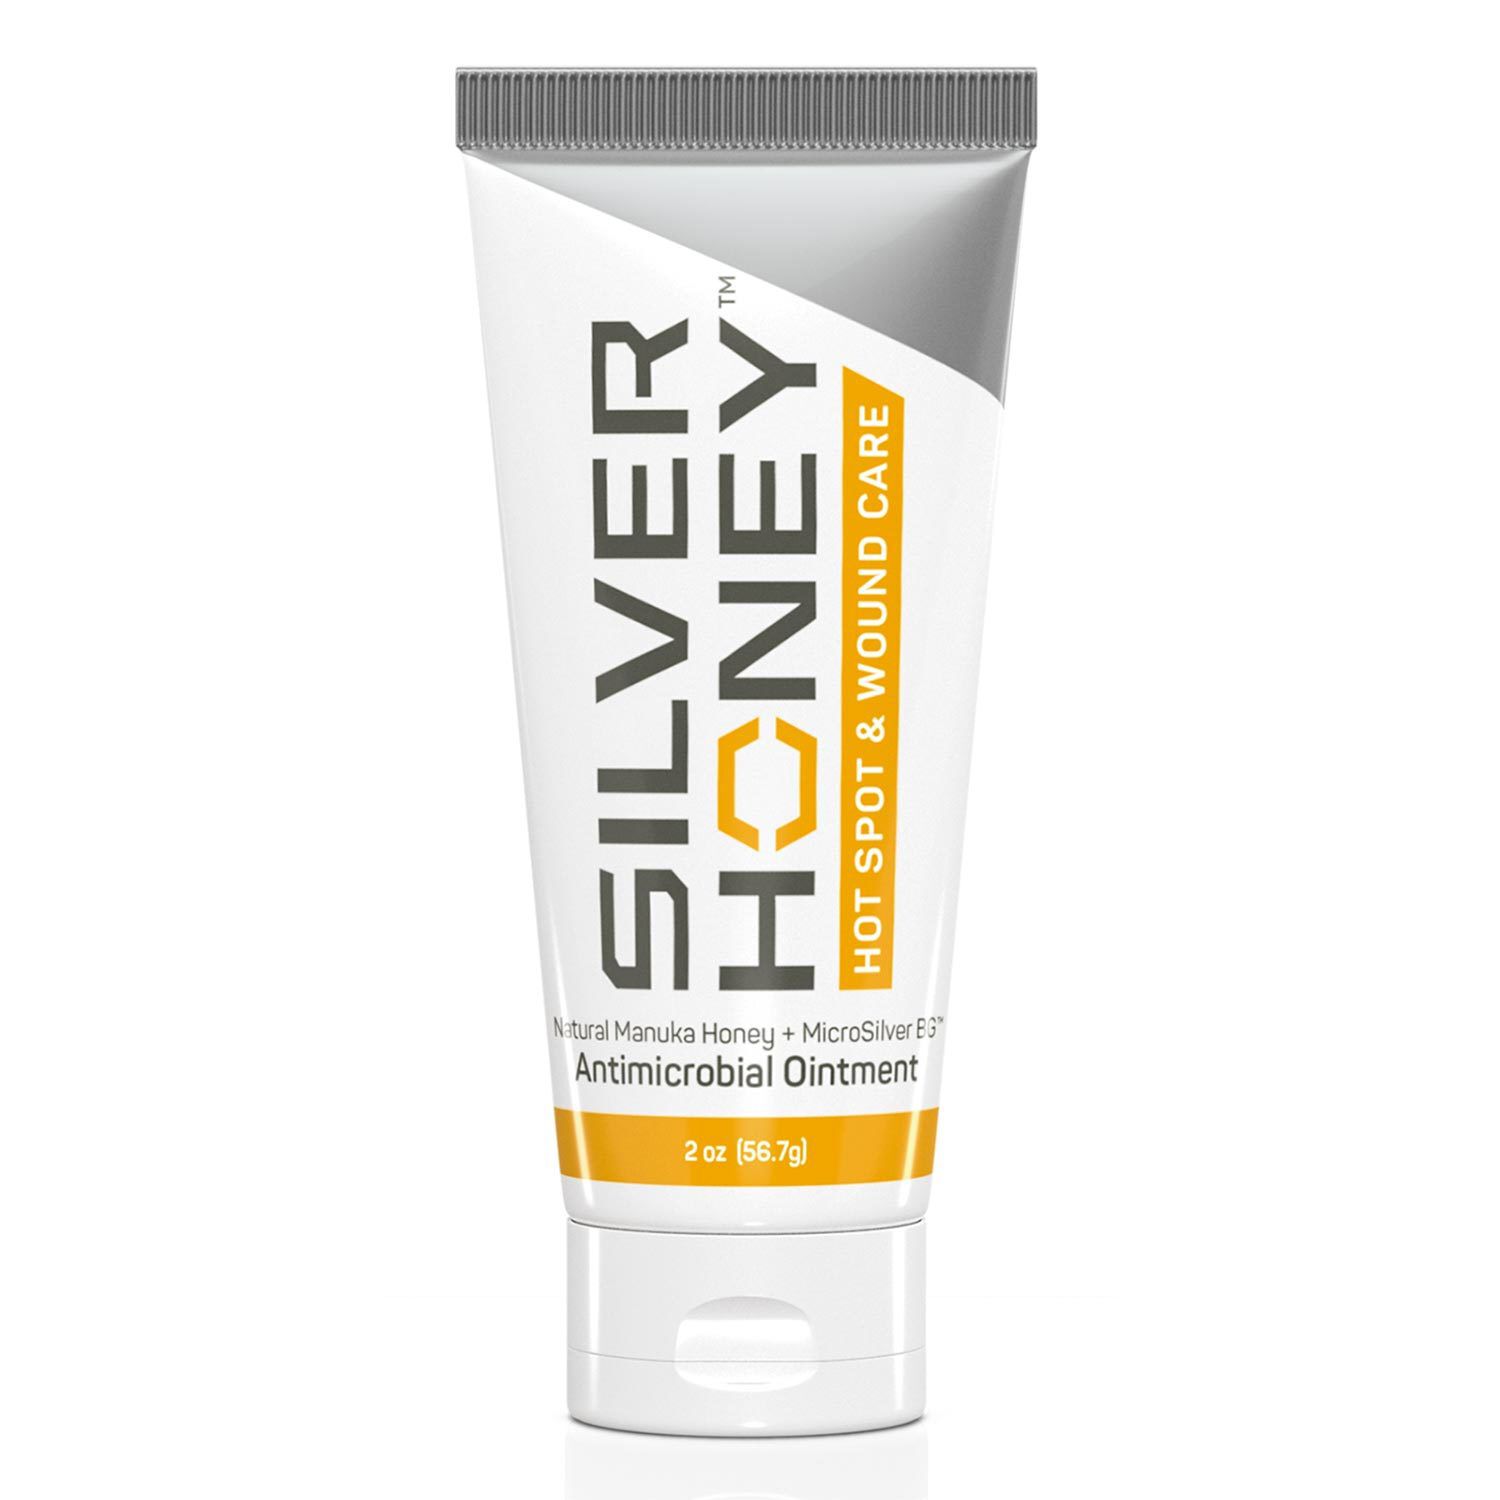 $2.50 Off select Silver Honey products